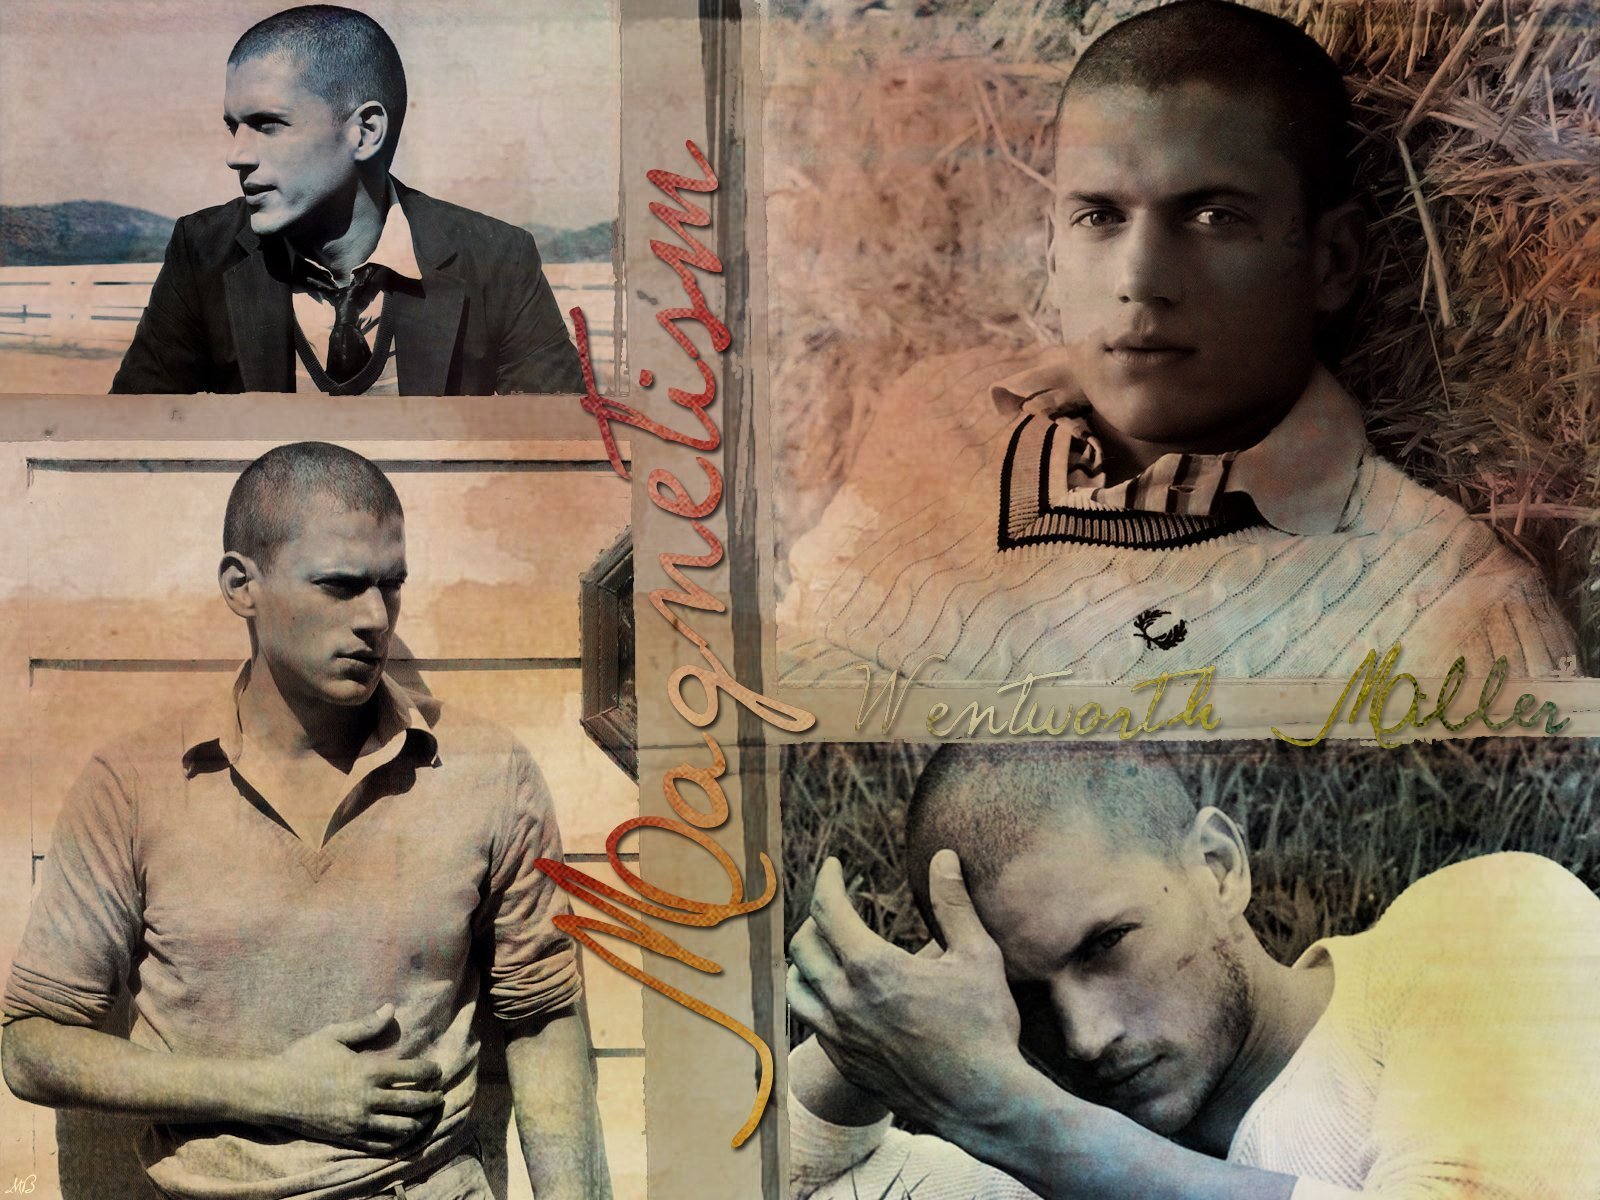 Wallpapers Went-wentworth-miller-2294100-1600-1200